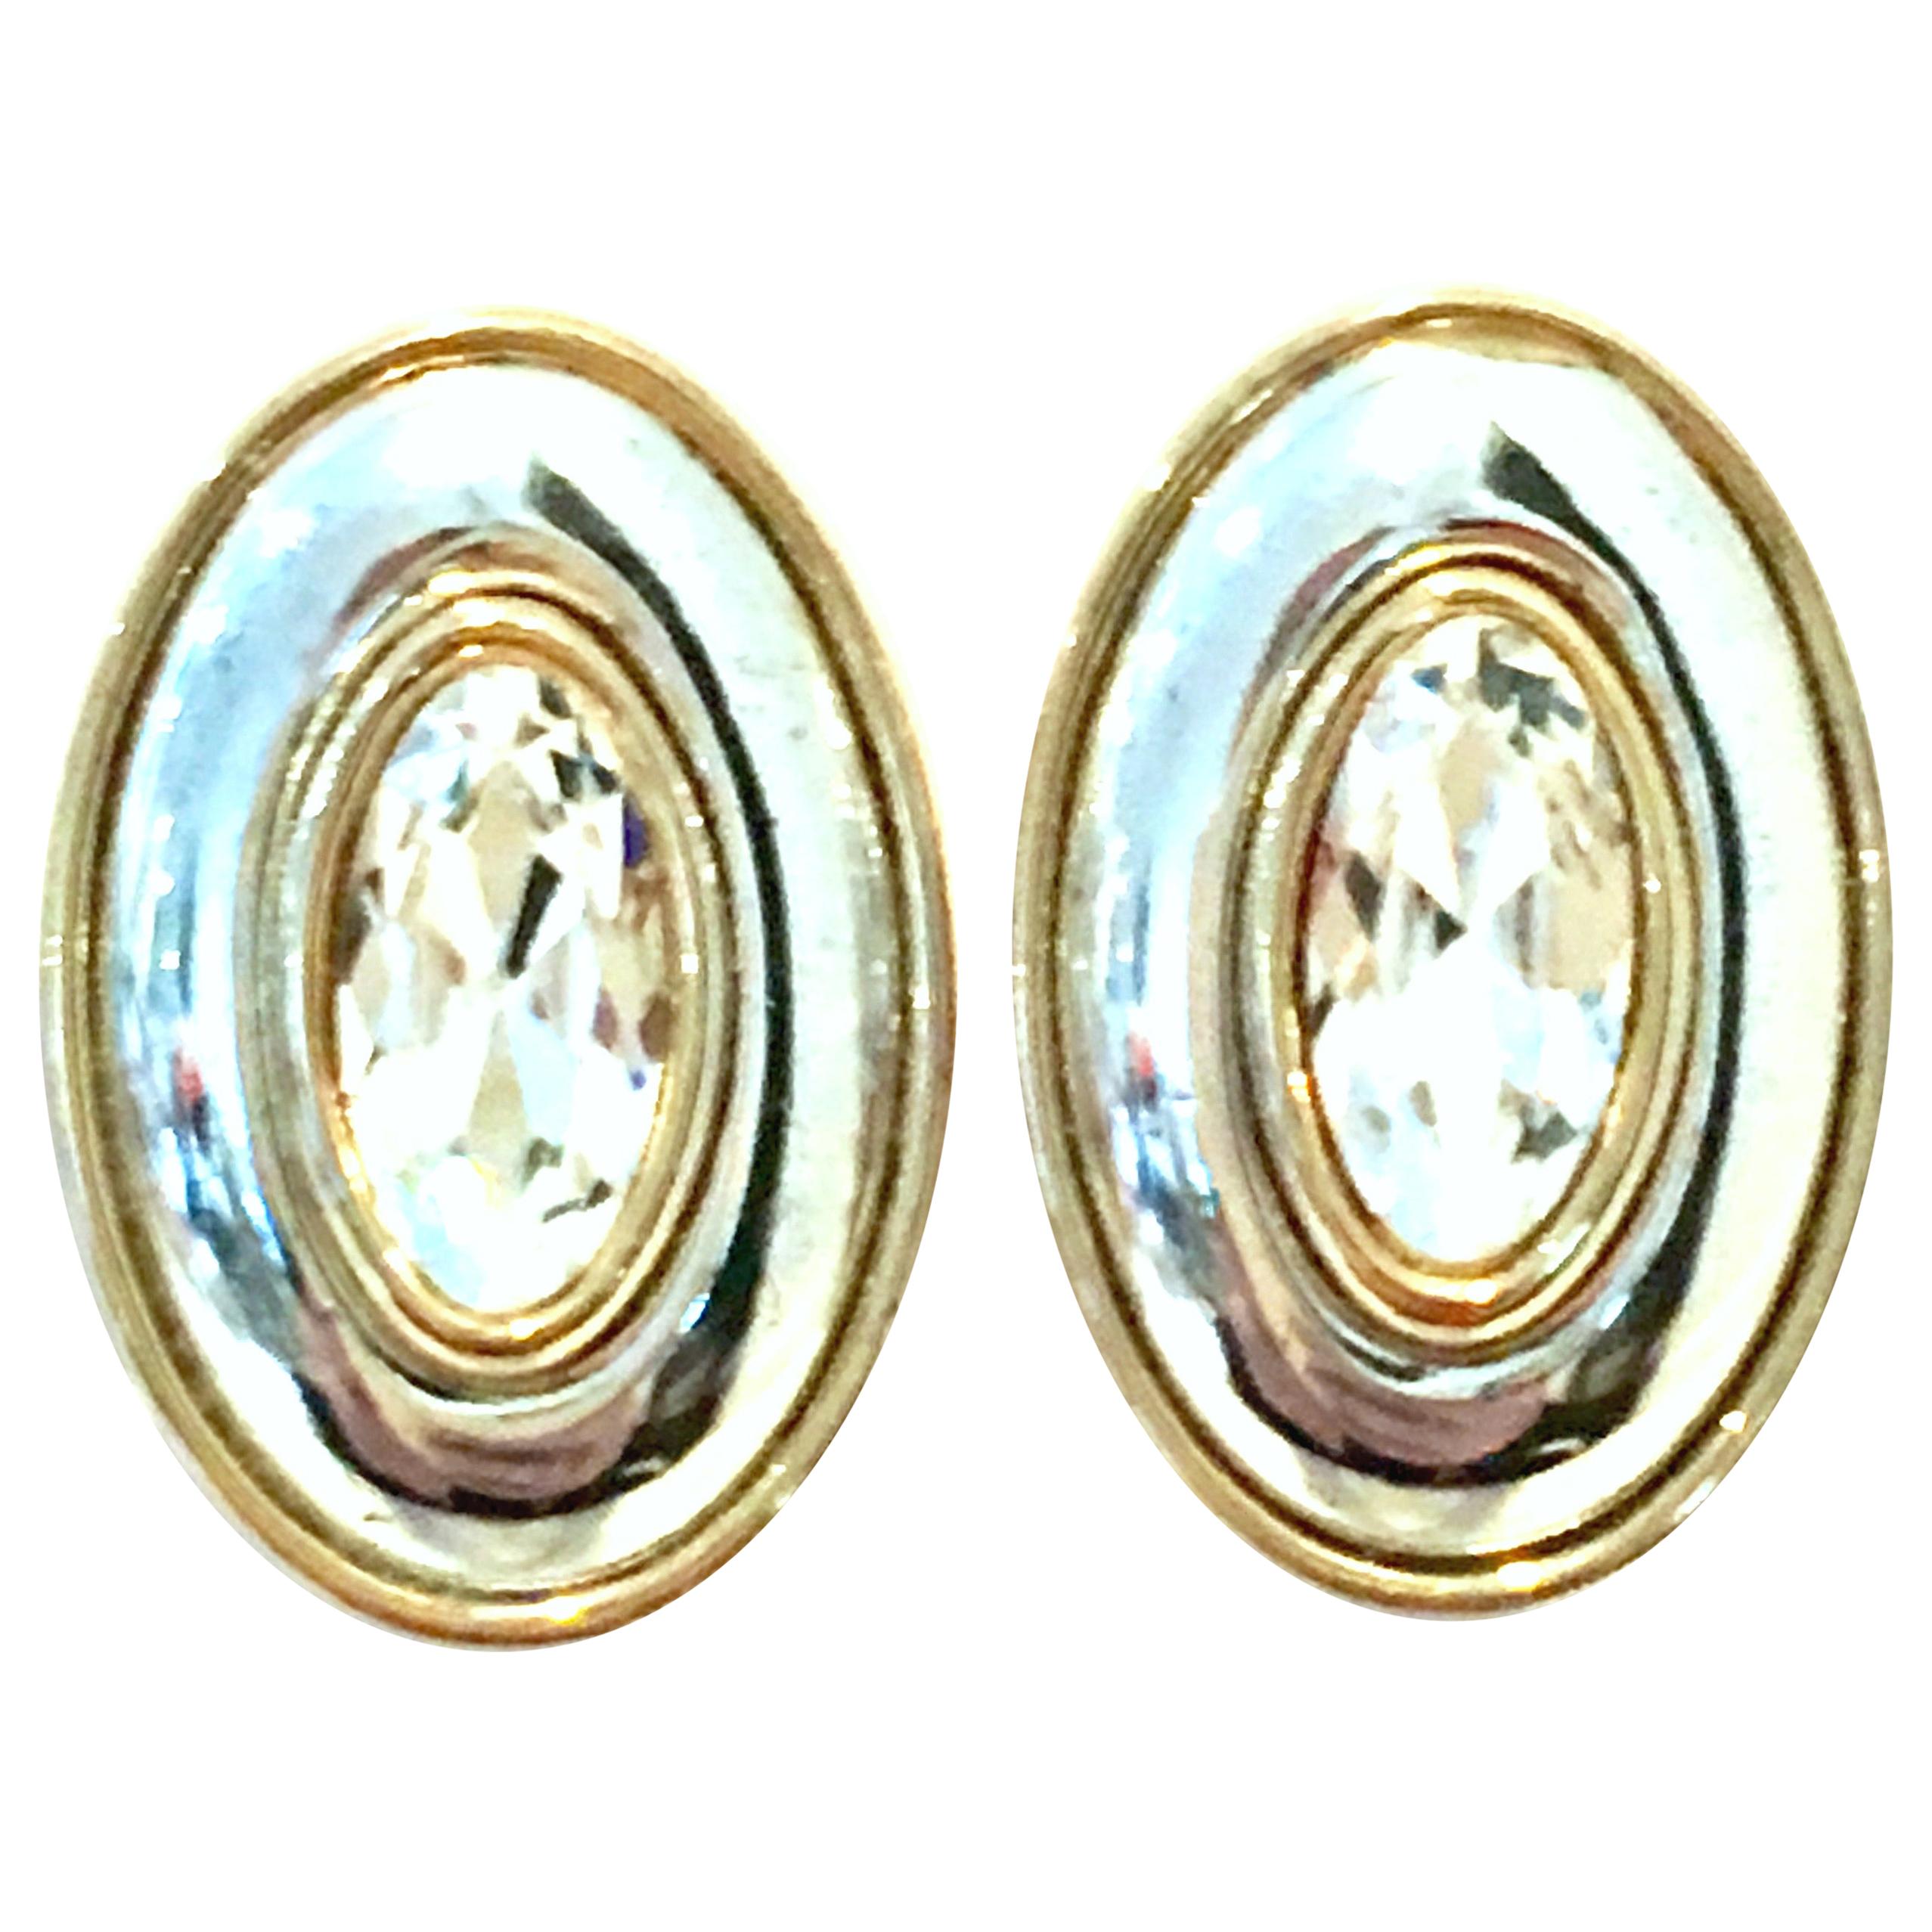 20th Century Silver & Gold Swarovski Crystal Earrings By, Givenchy